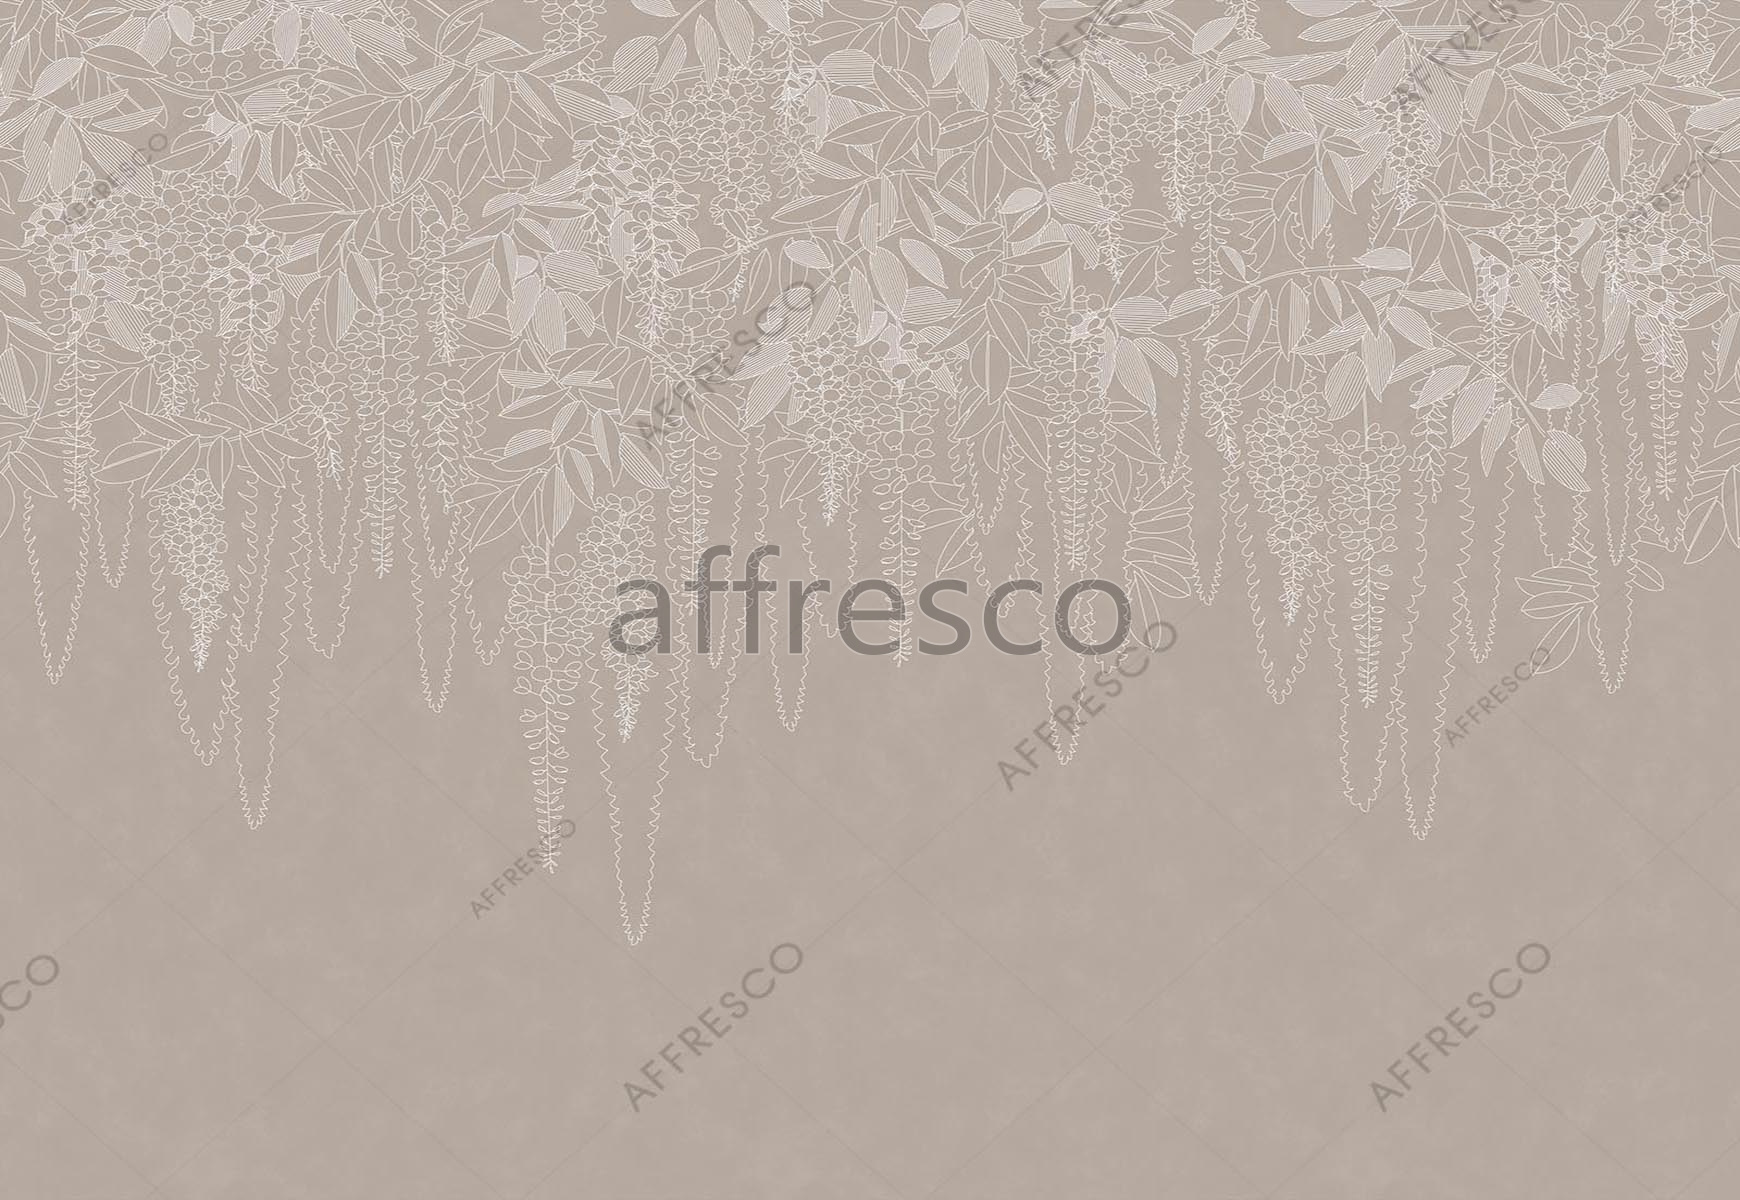 ID139200 | Forest | Blooming Miami | Affresco Factory